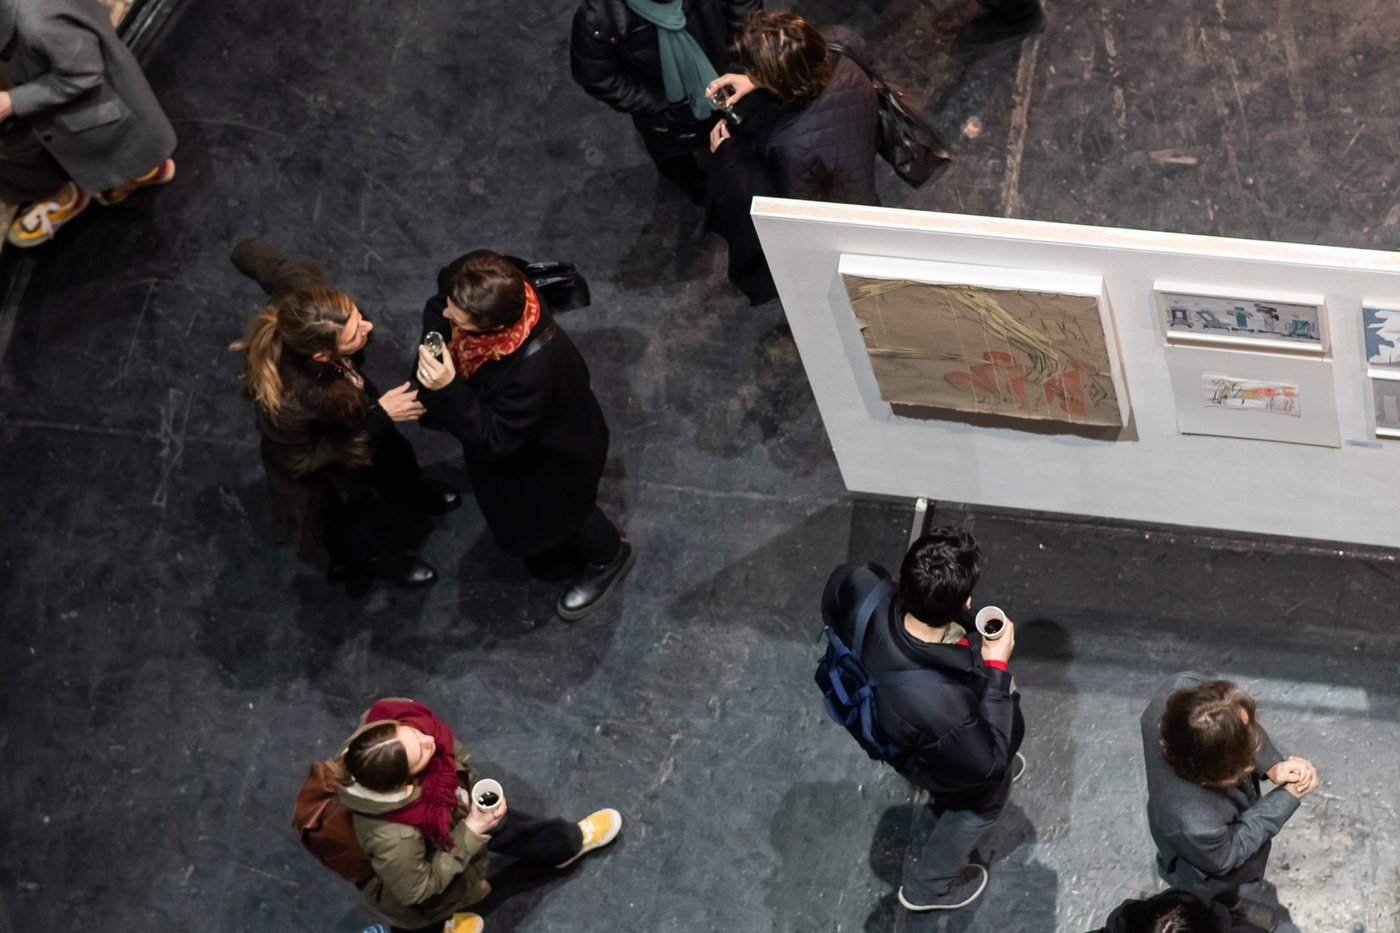 picture of people from above, they are talking and looking at artworks on a white wall